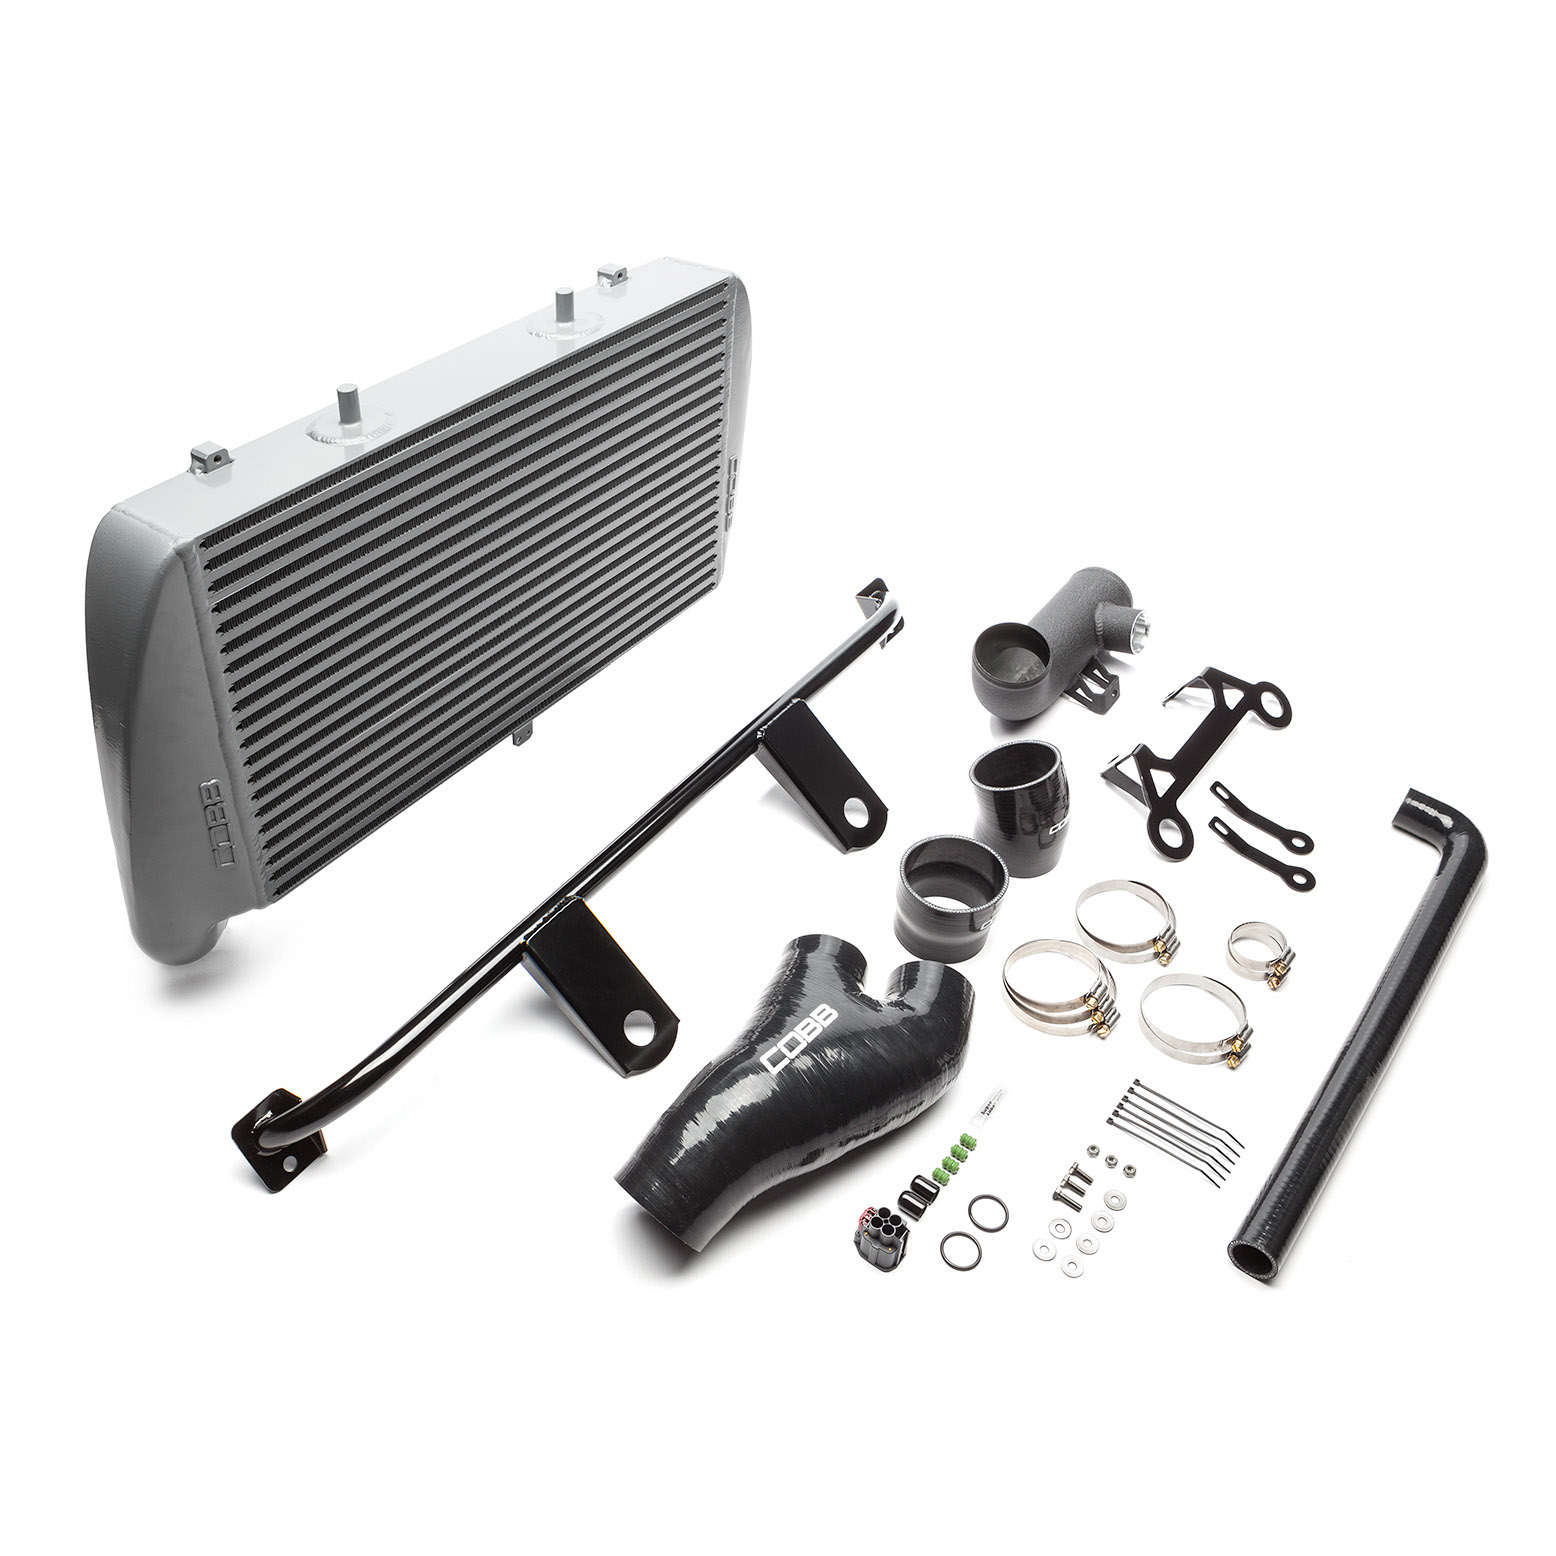 Stage 2 Power Package Silver Ford F-150 Raptor 2021-2022